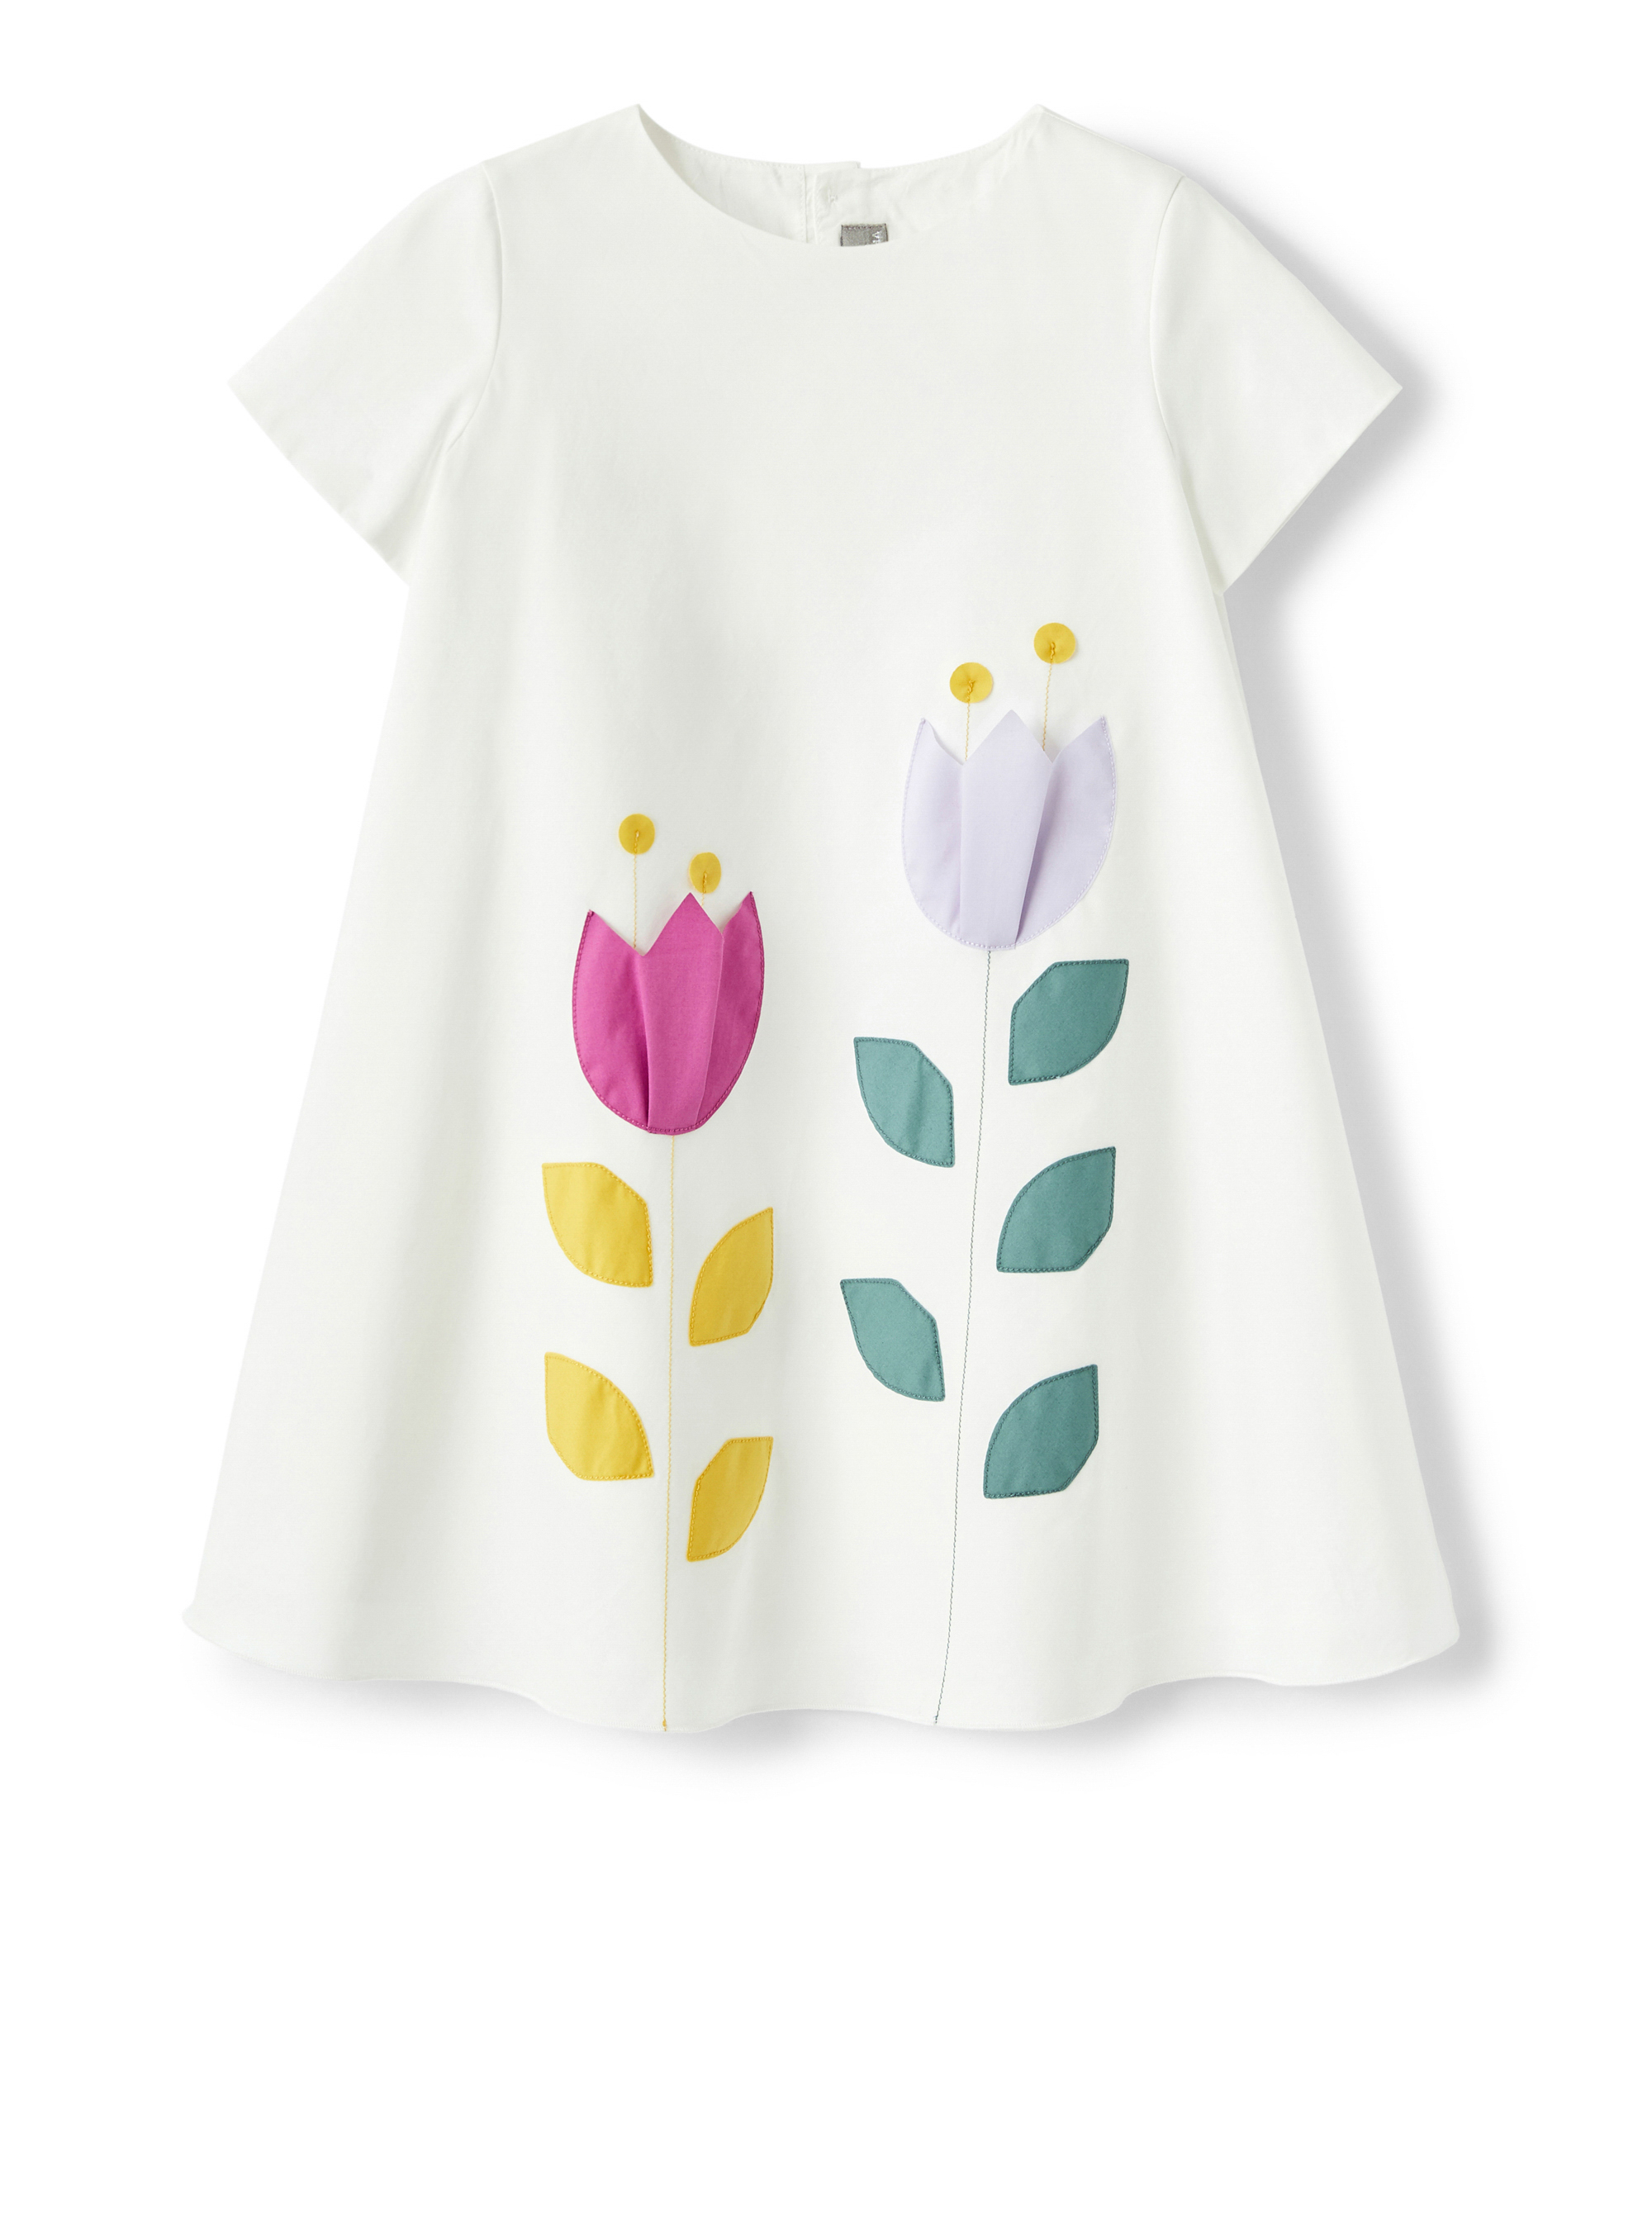 White dress with applied flowers - White | Il Gufo